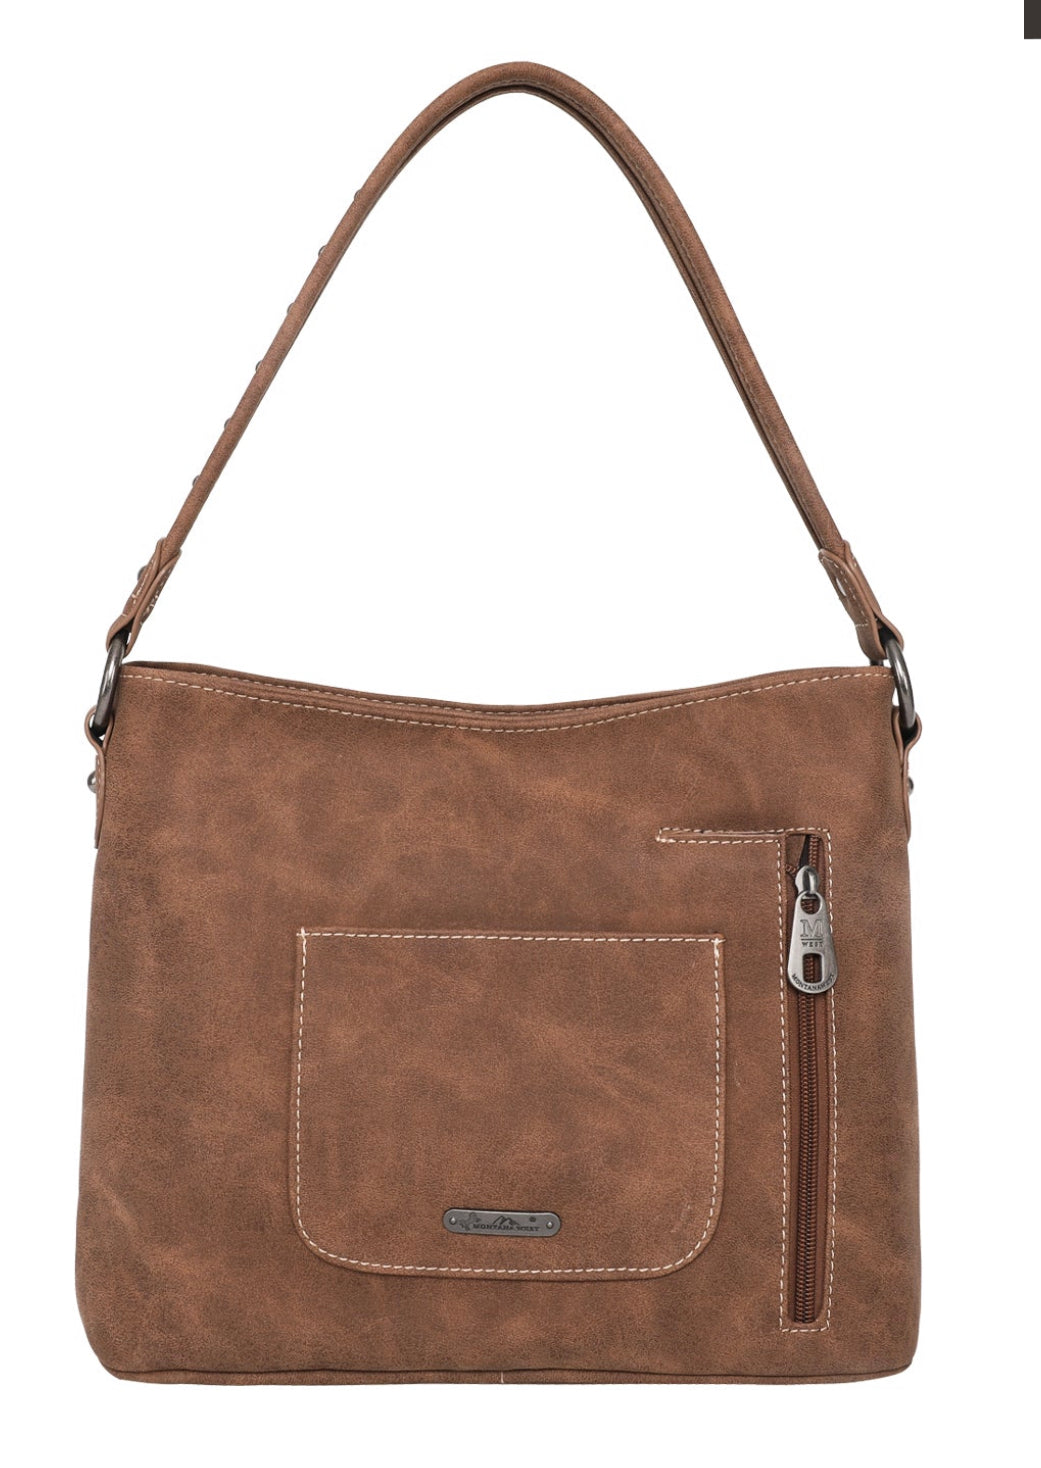 Back View with Pocket-Montana West Fringe Collection Concealed Carry Hobo Leather Purse